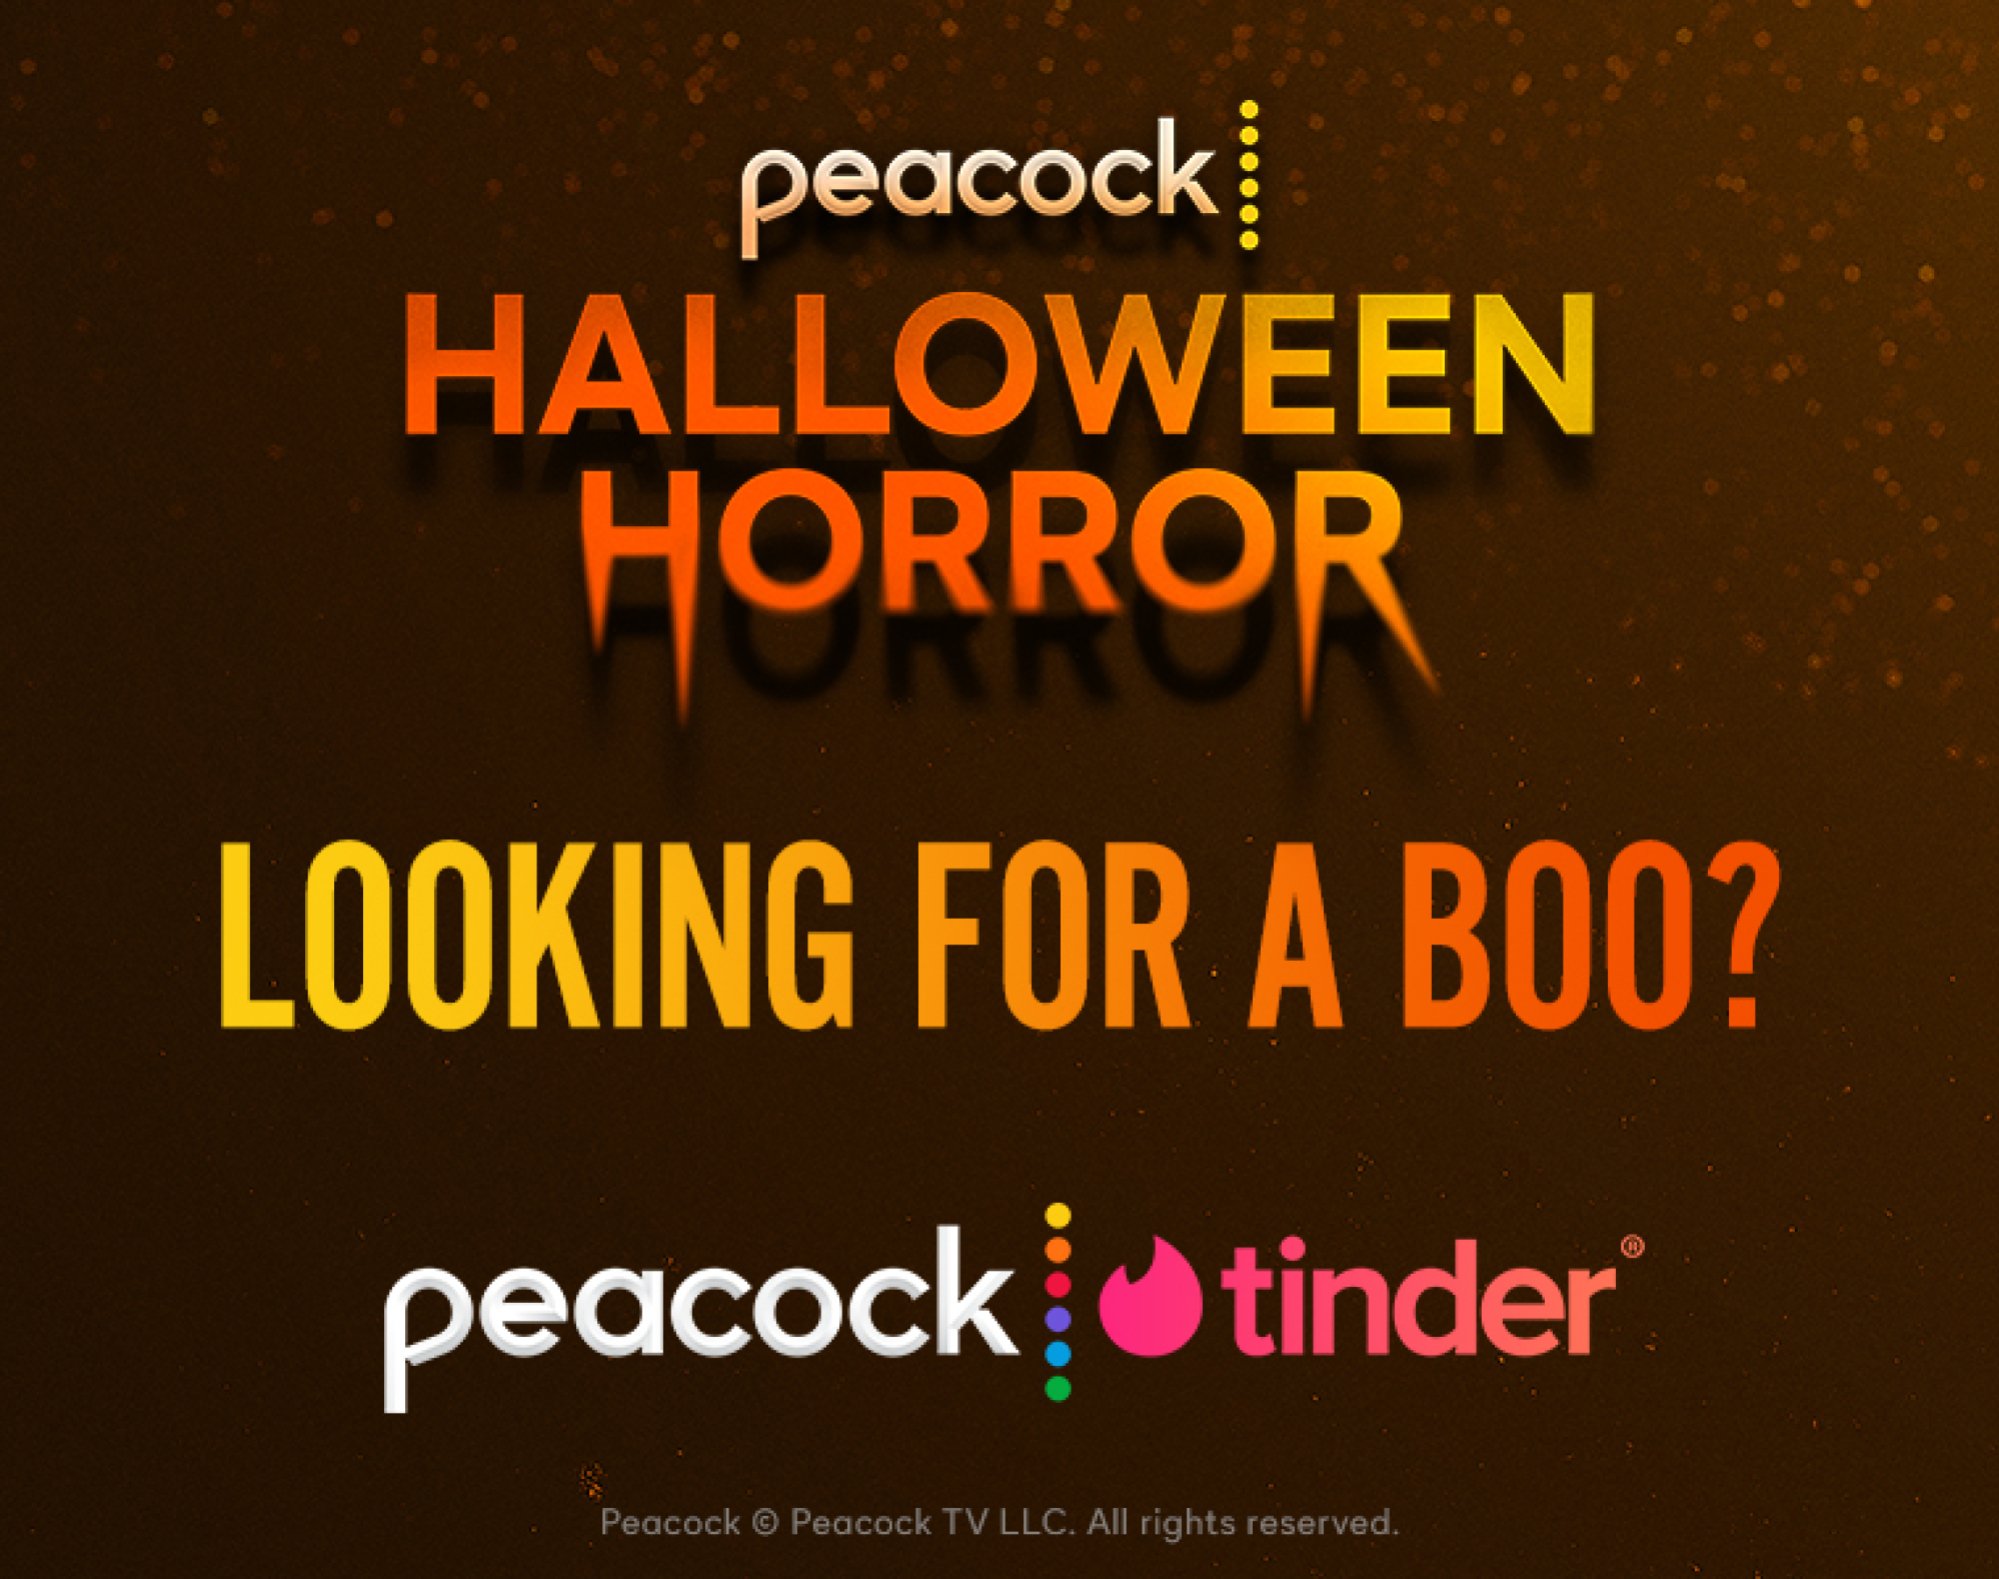 text reading: Peacock Halloween Horror. Looking for a boo? with Peacock and Tinder logos